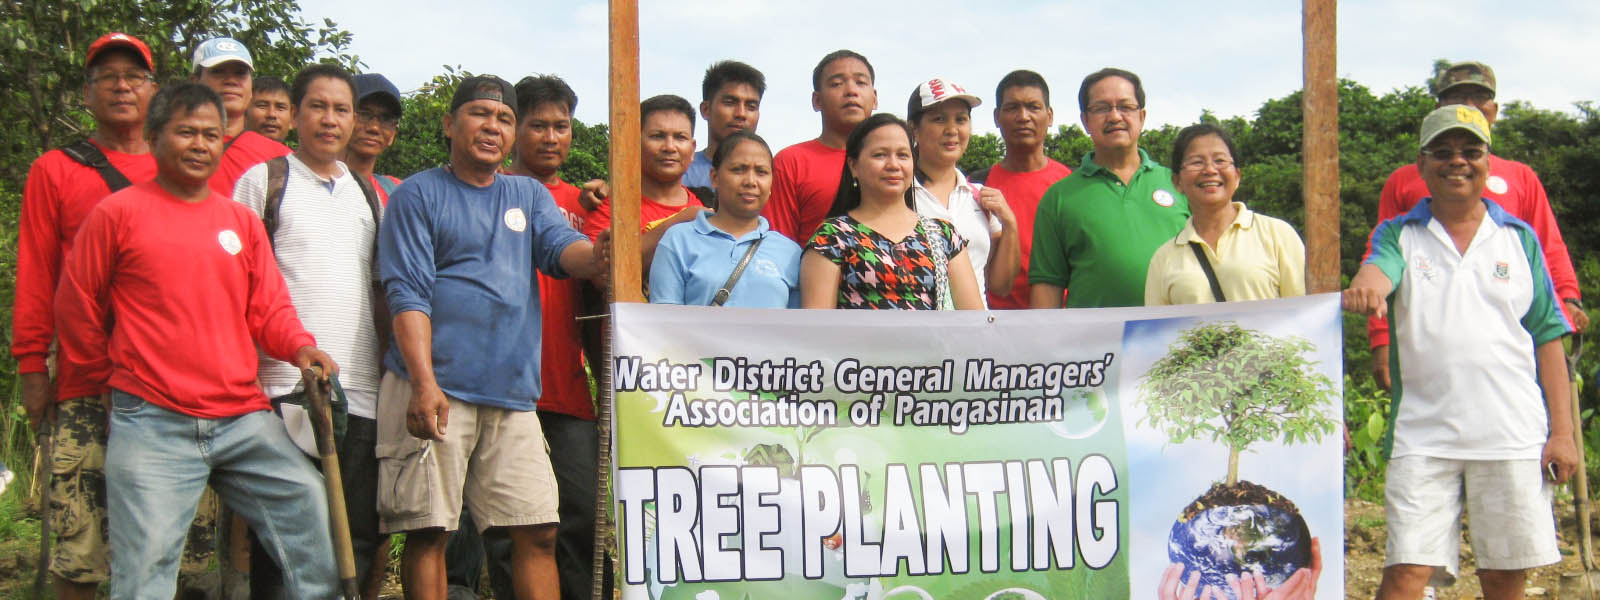 Binmaley Water District Tree Planting Activity